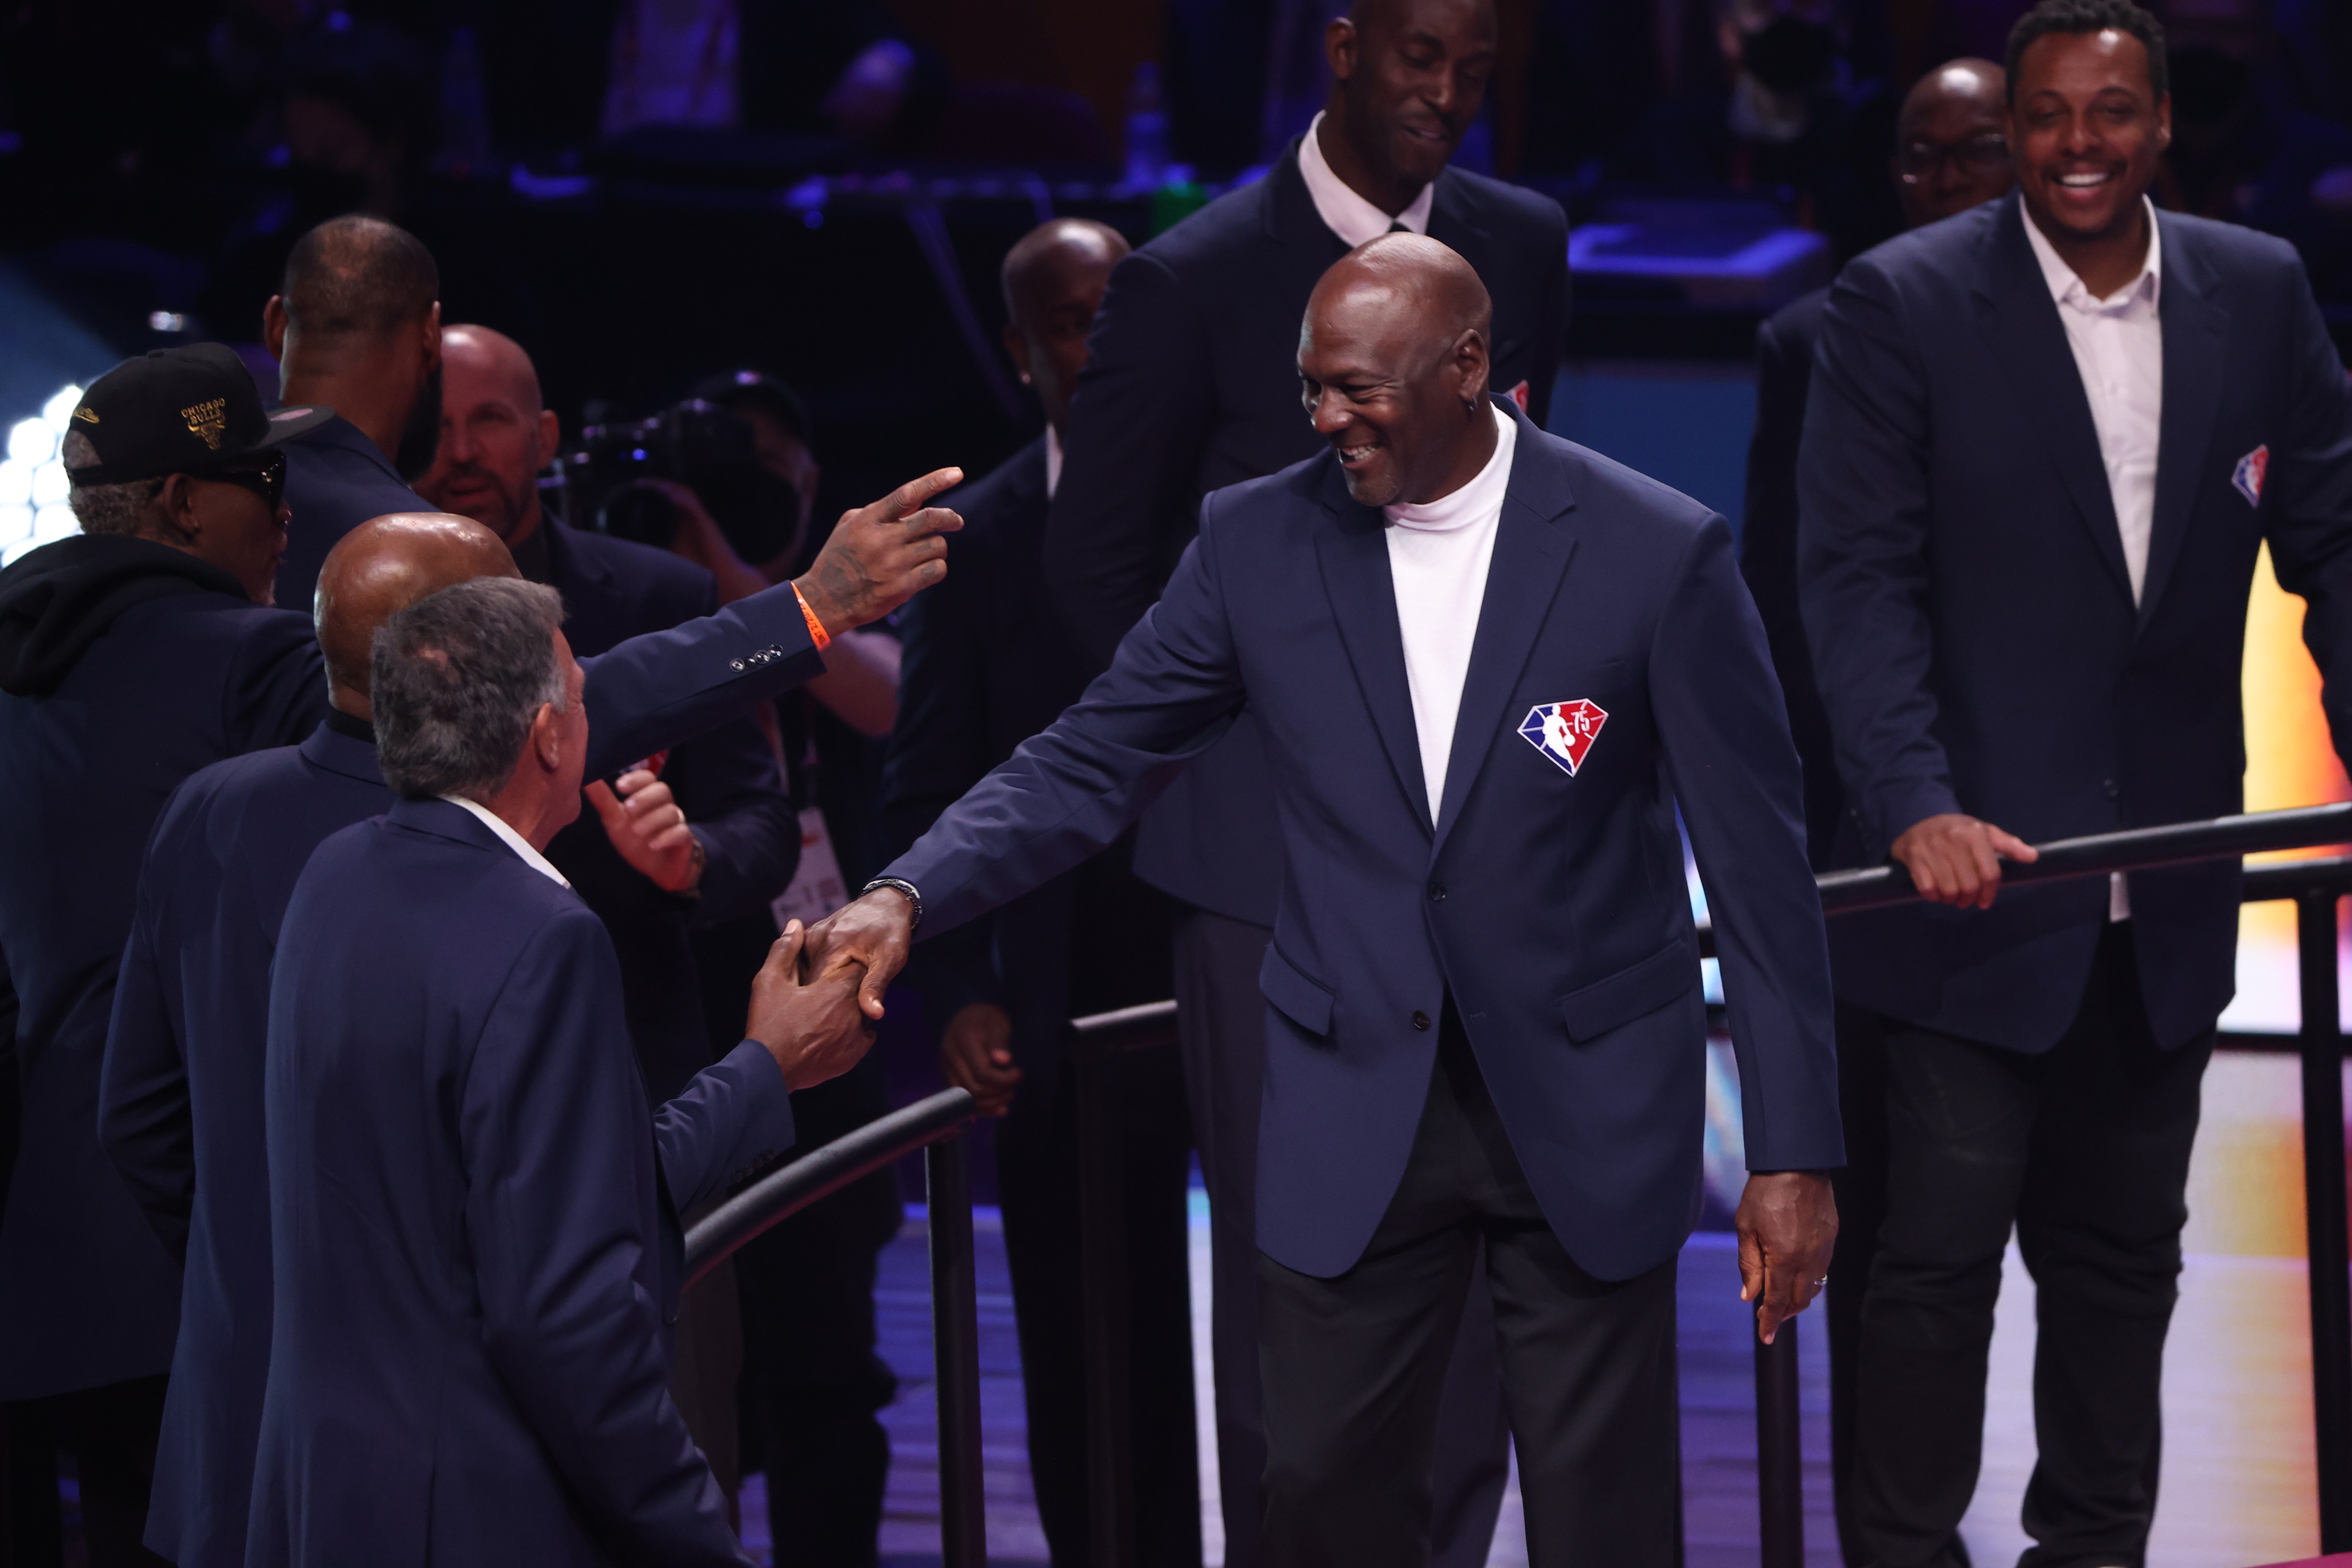 Video of the NBA's legends posing for a photo for the NBA's 75th